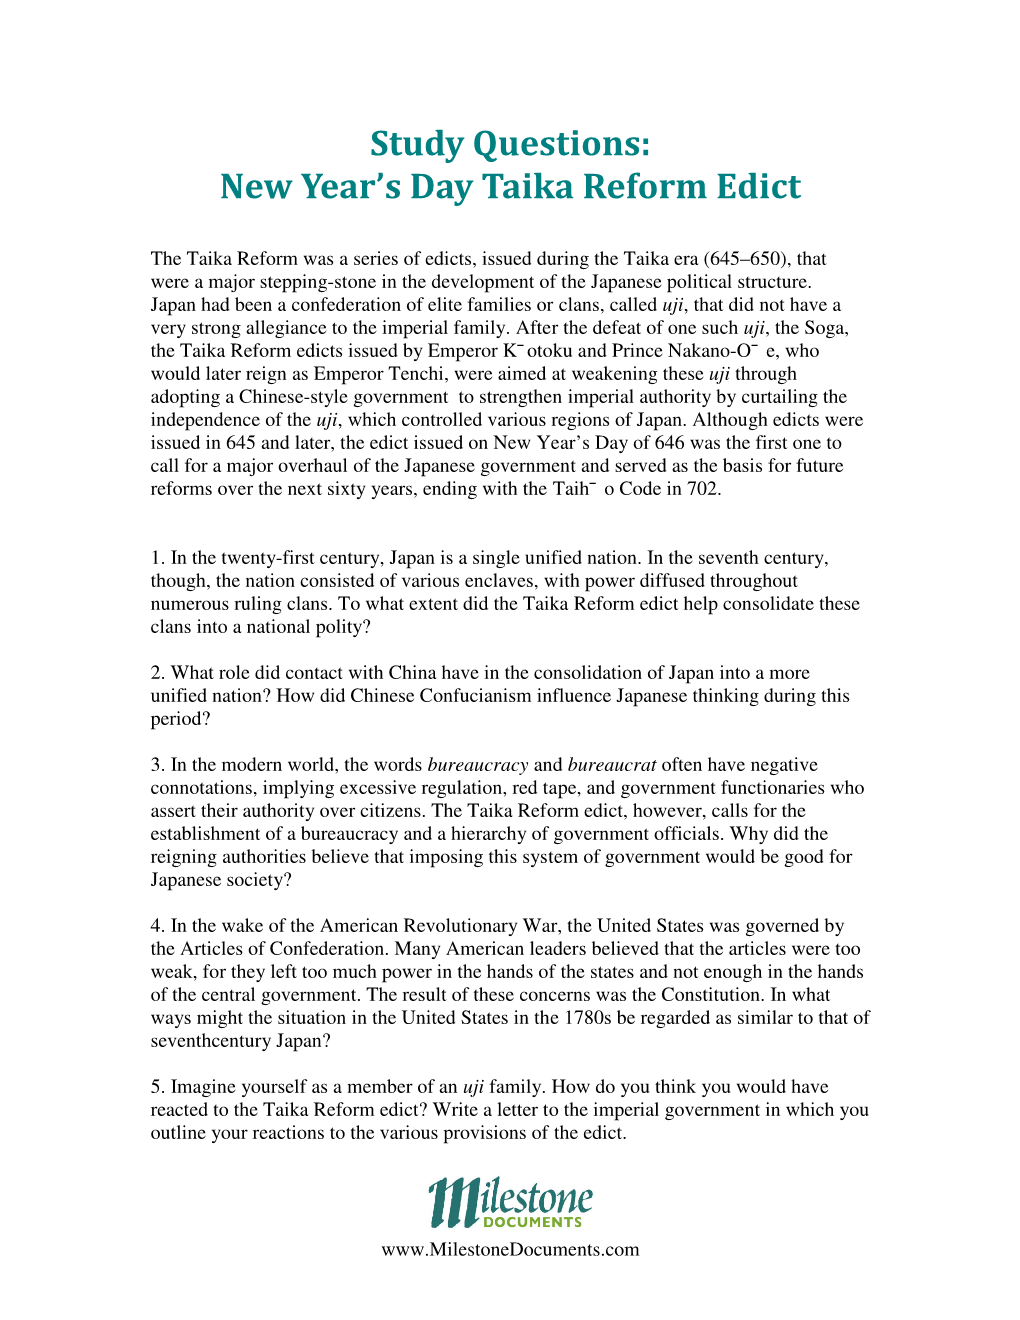 New Year's Day Taika Reform Edict